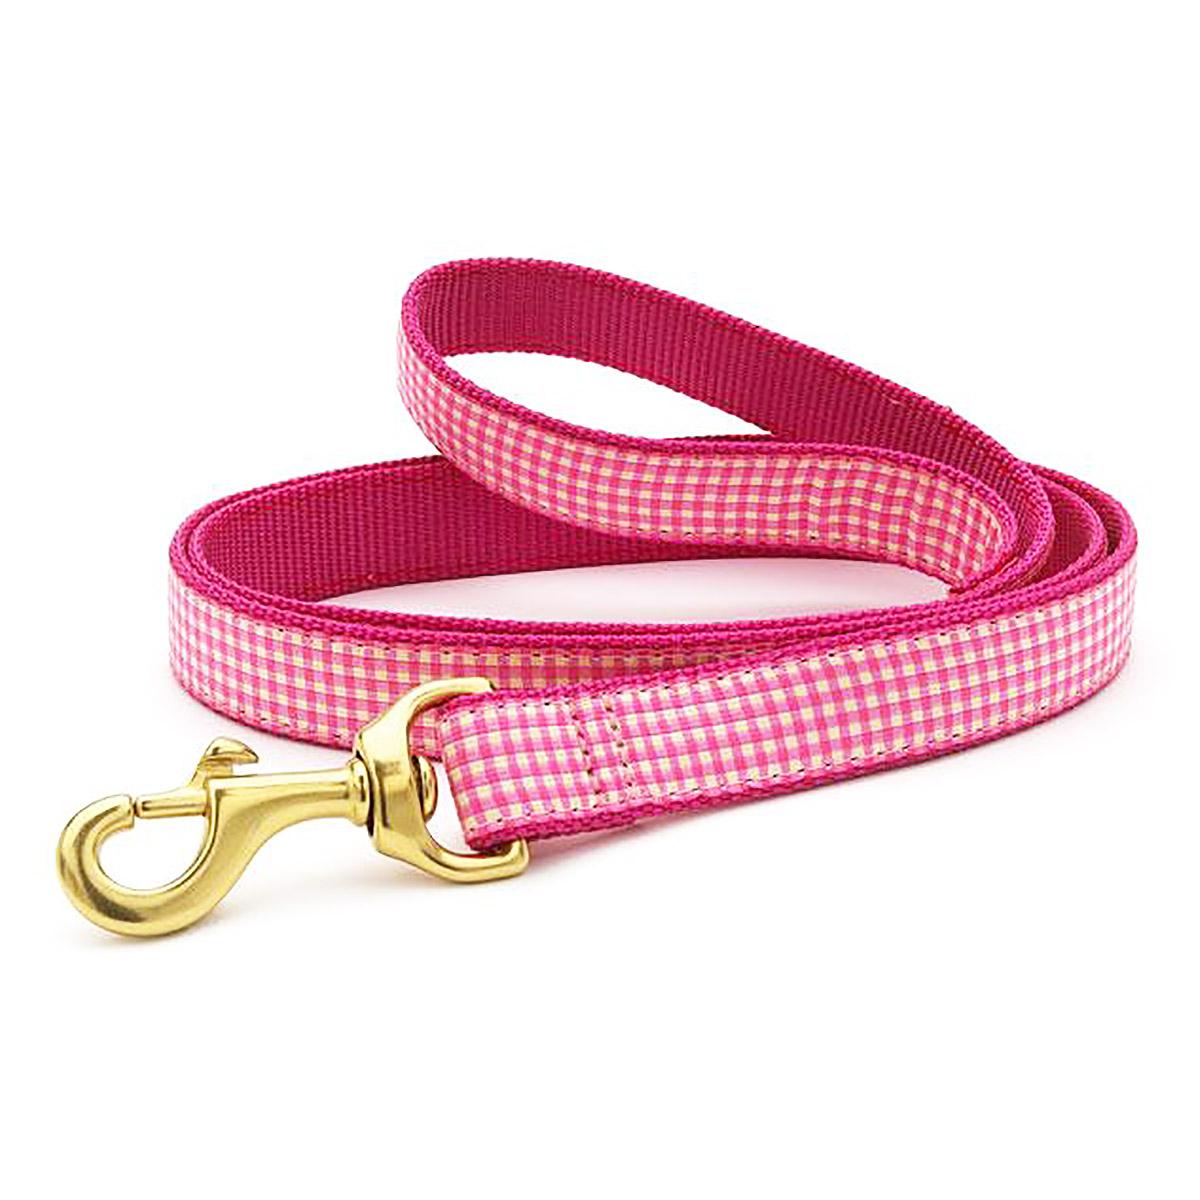 Pink Gingham Dog Leash by Up Country